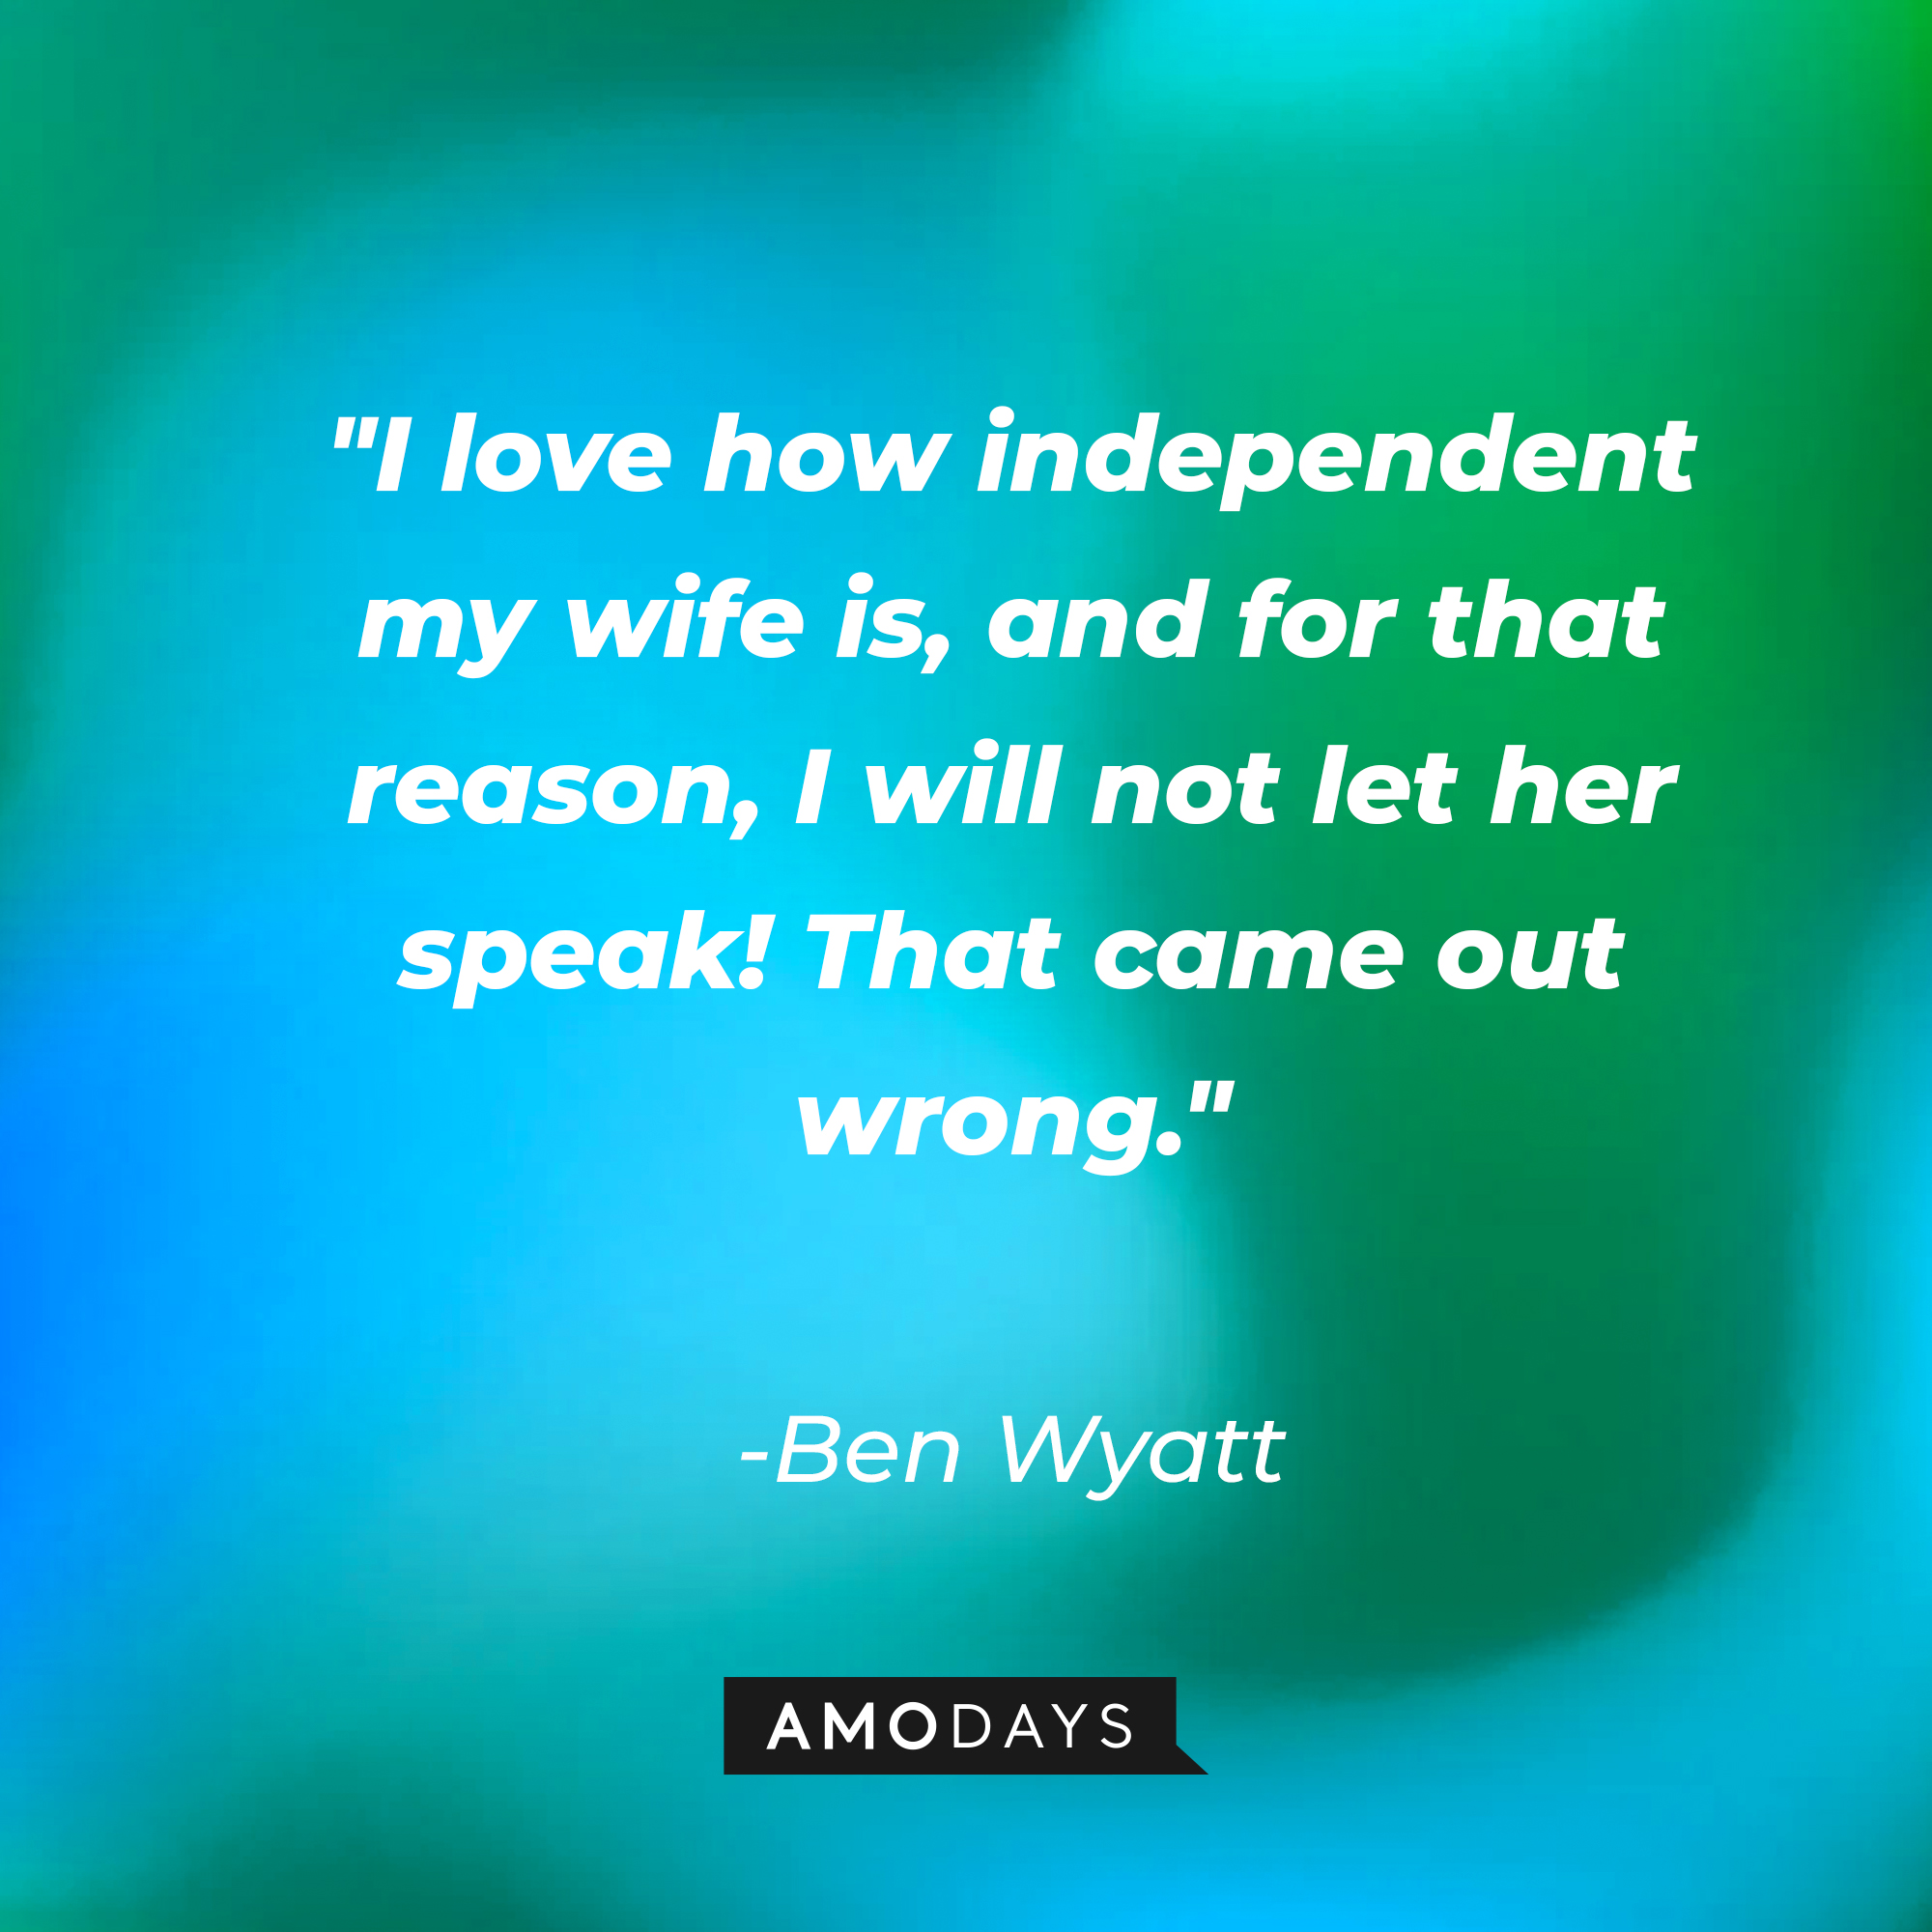 Ben Wyatt's quote: "I love how independent my wife is, and for that reason, I will not let her speak! That came out wrong." | Source: AmoDays